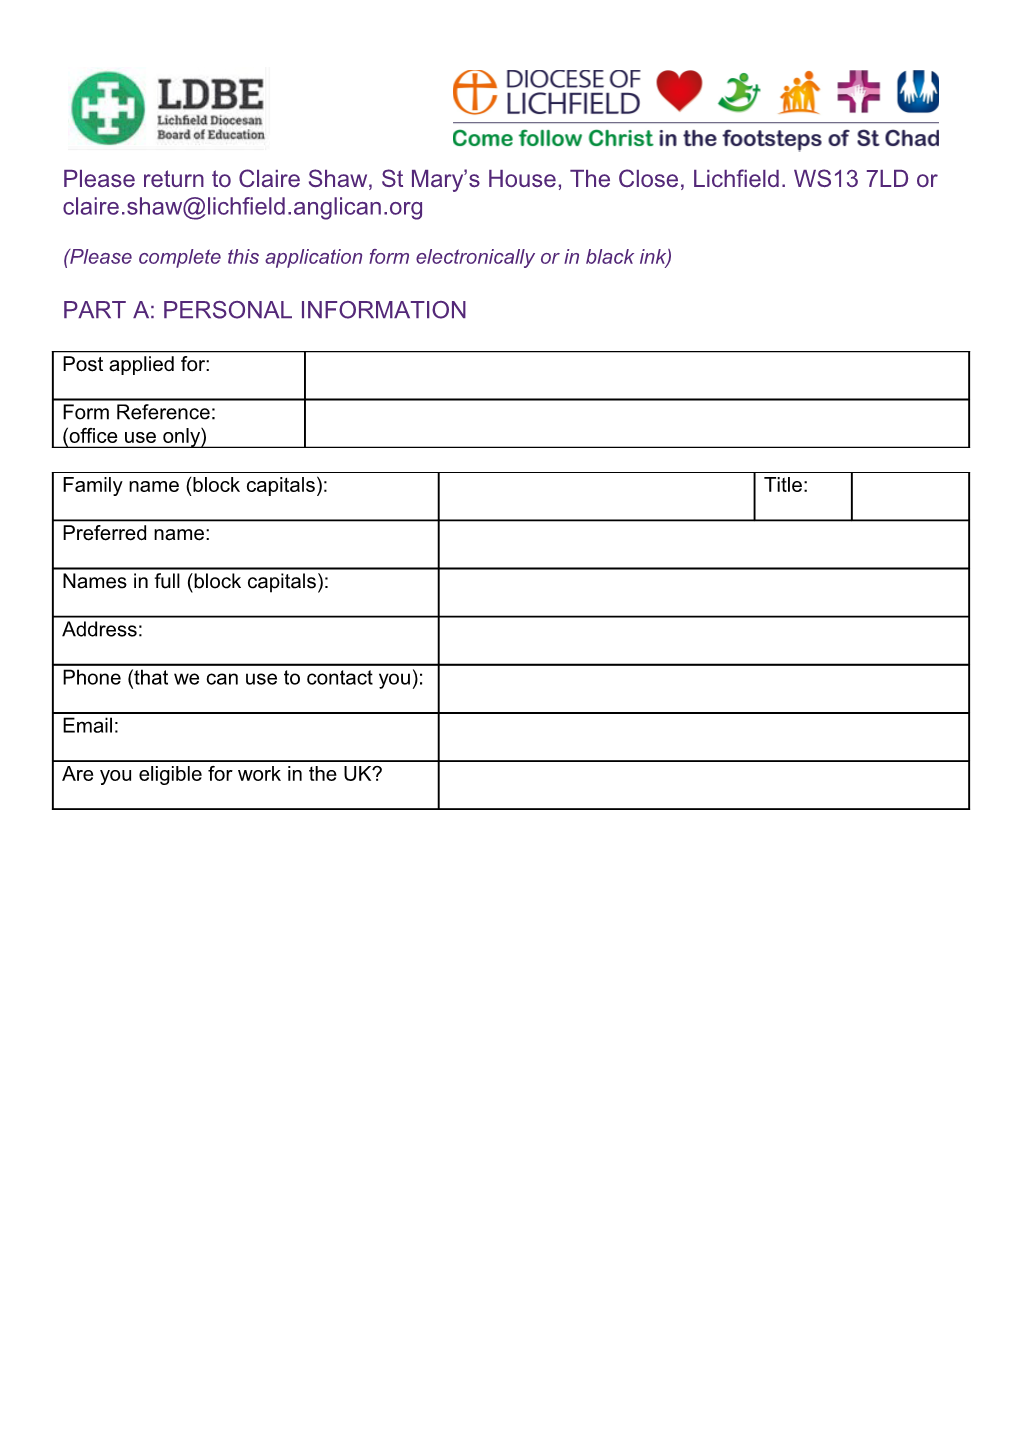 Please Complete This Application Form Electronically Or in Black Ink